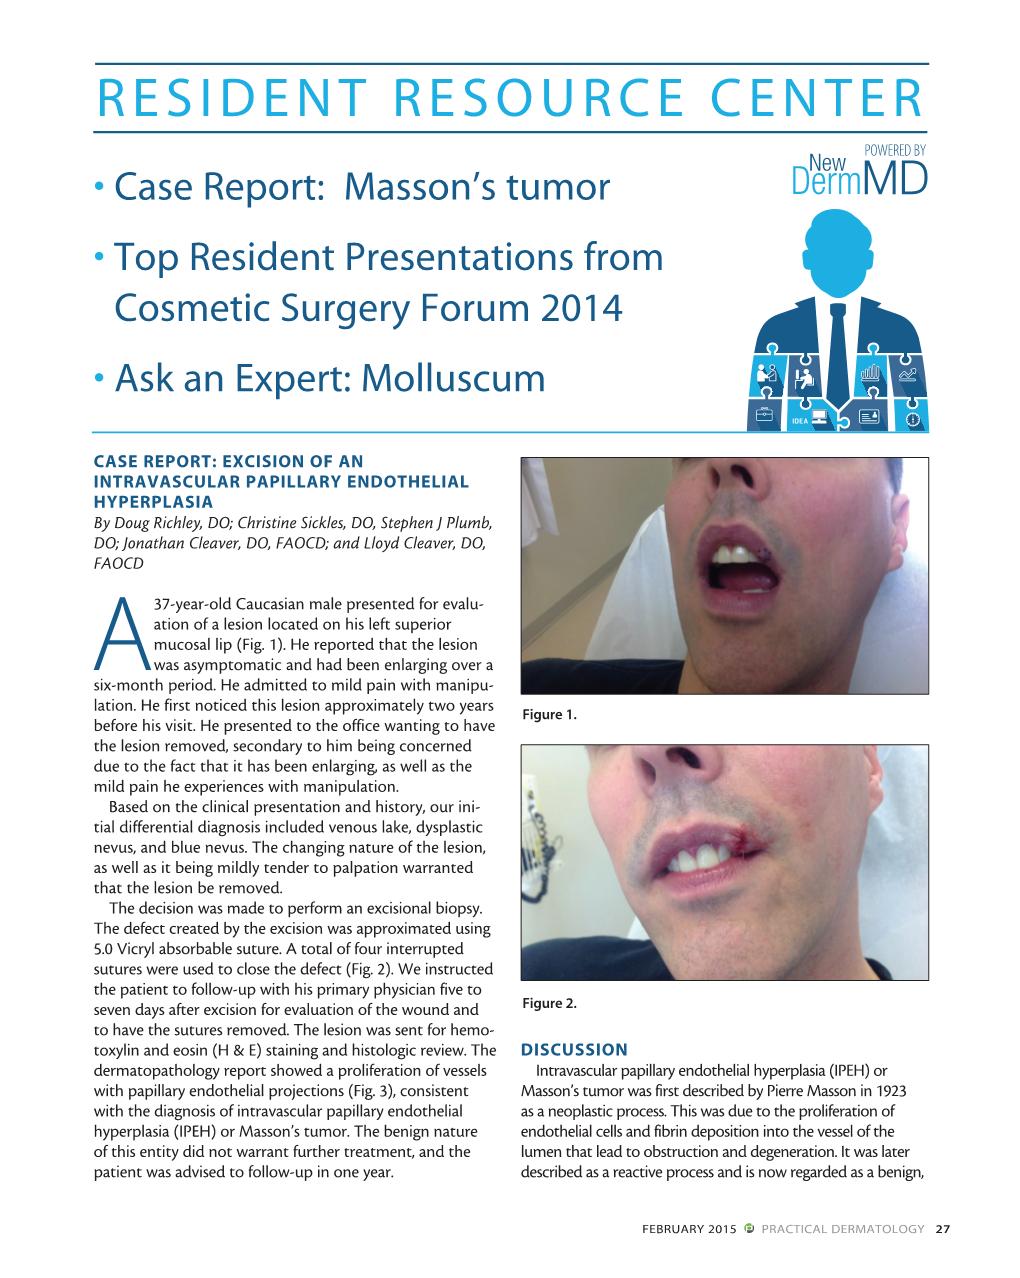 RESIDENT RESOURCE CENTER POWERED by • Case Report: Masson’S Tumor • Top Resident Presentations from Cosmetic Surgery Forum 2014 • Ask an Expert: Molluscum